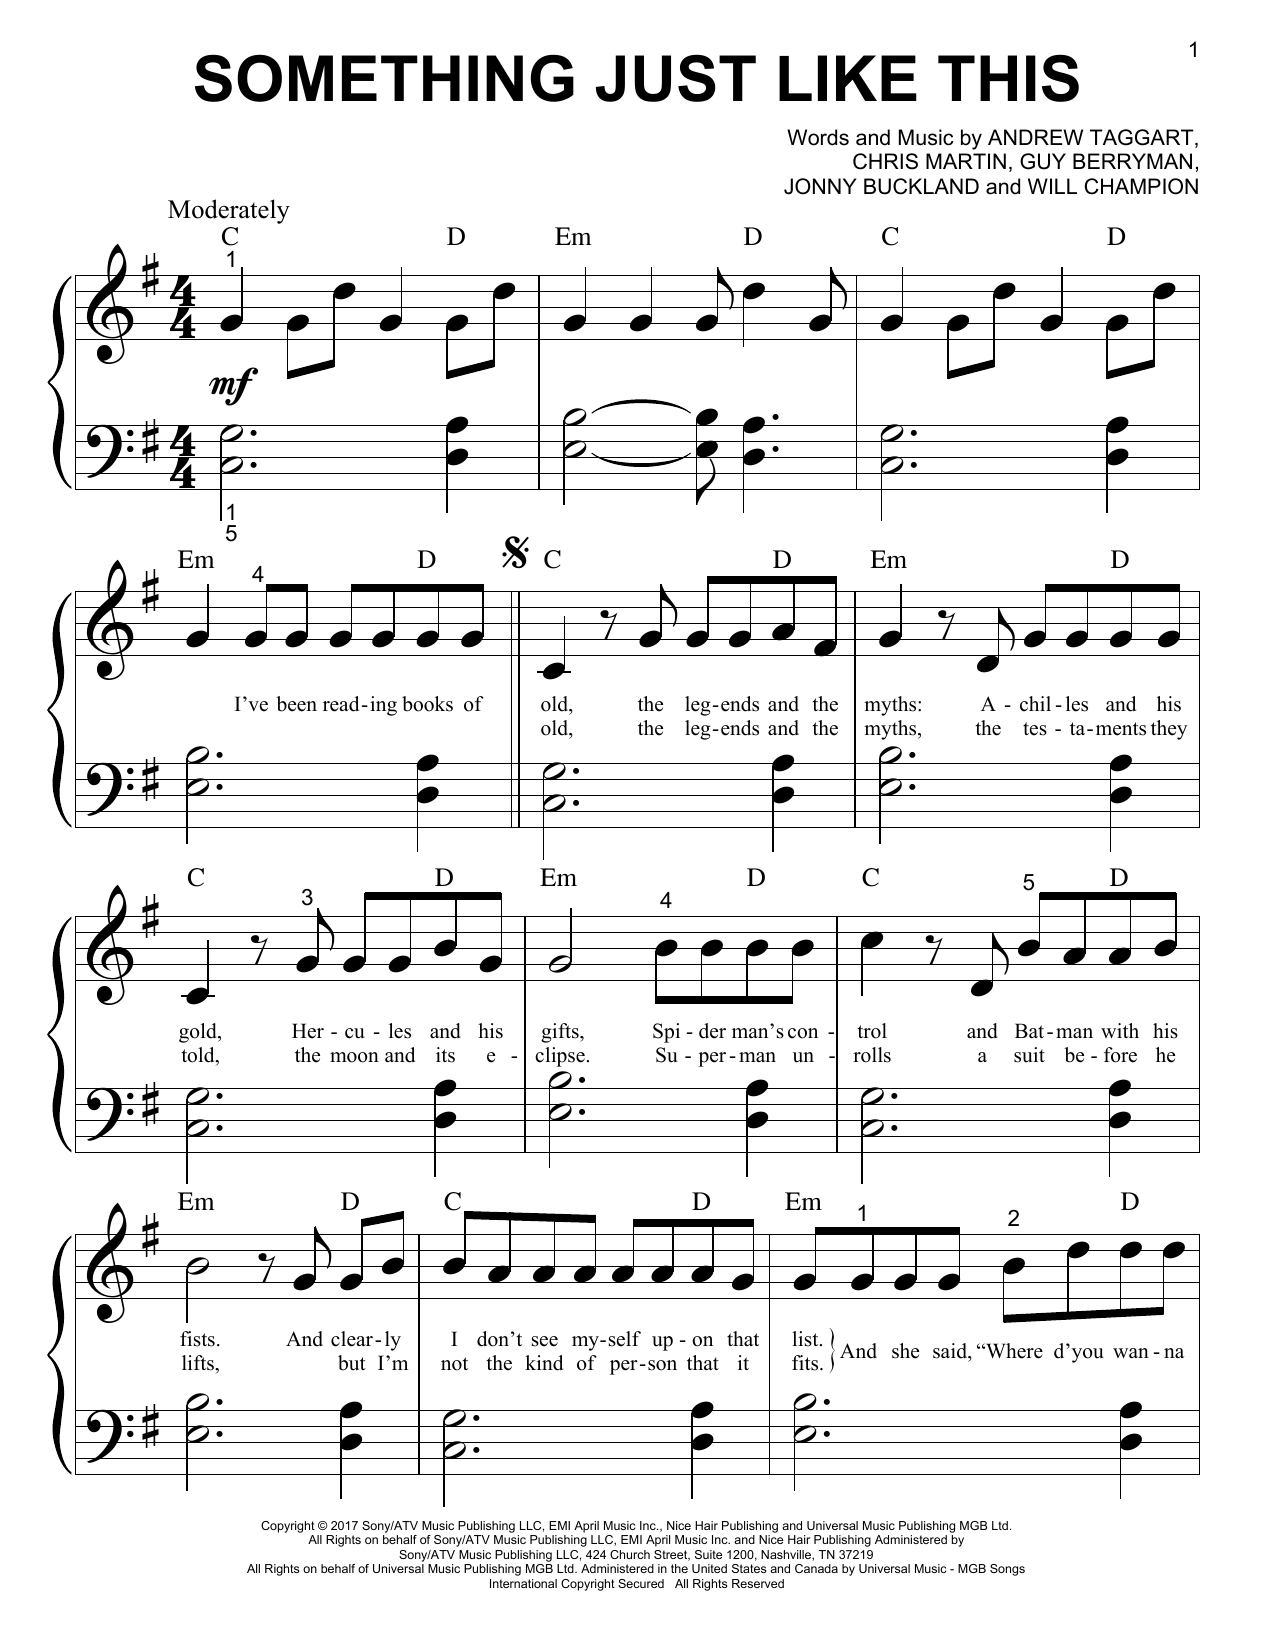 Download The Chainsmokers & Coldplay Something Just Like This Sheet Music